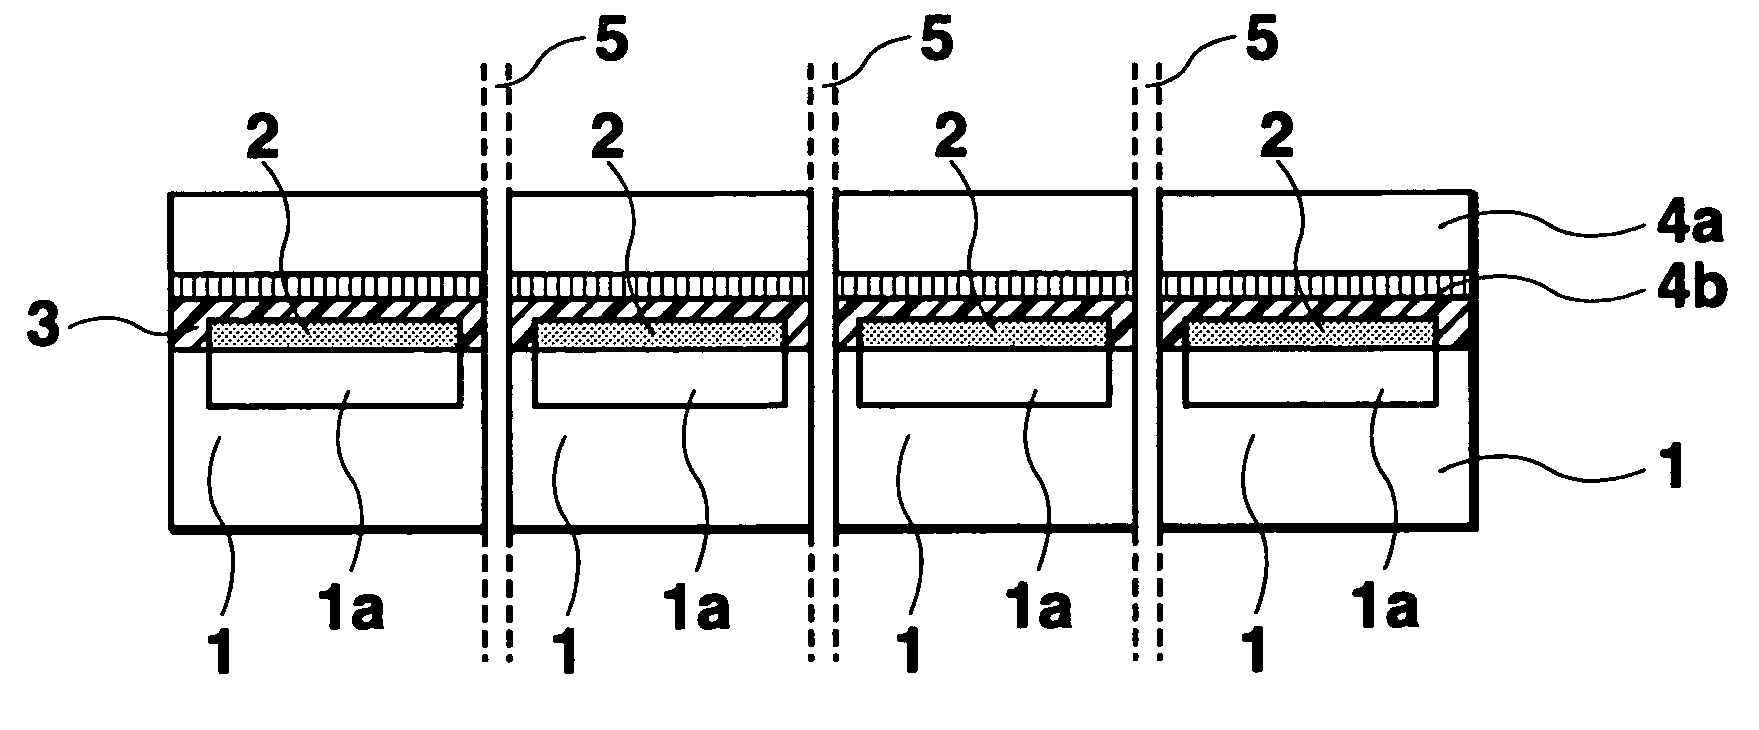 Method for manufacturing a solid-state image sensing device, such as a CCD